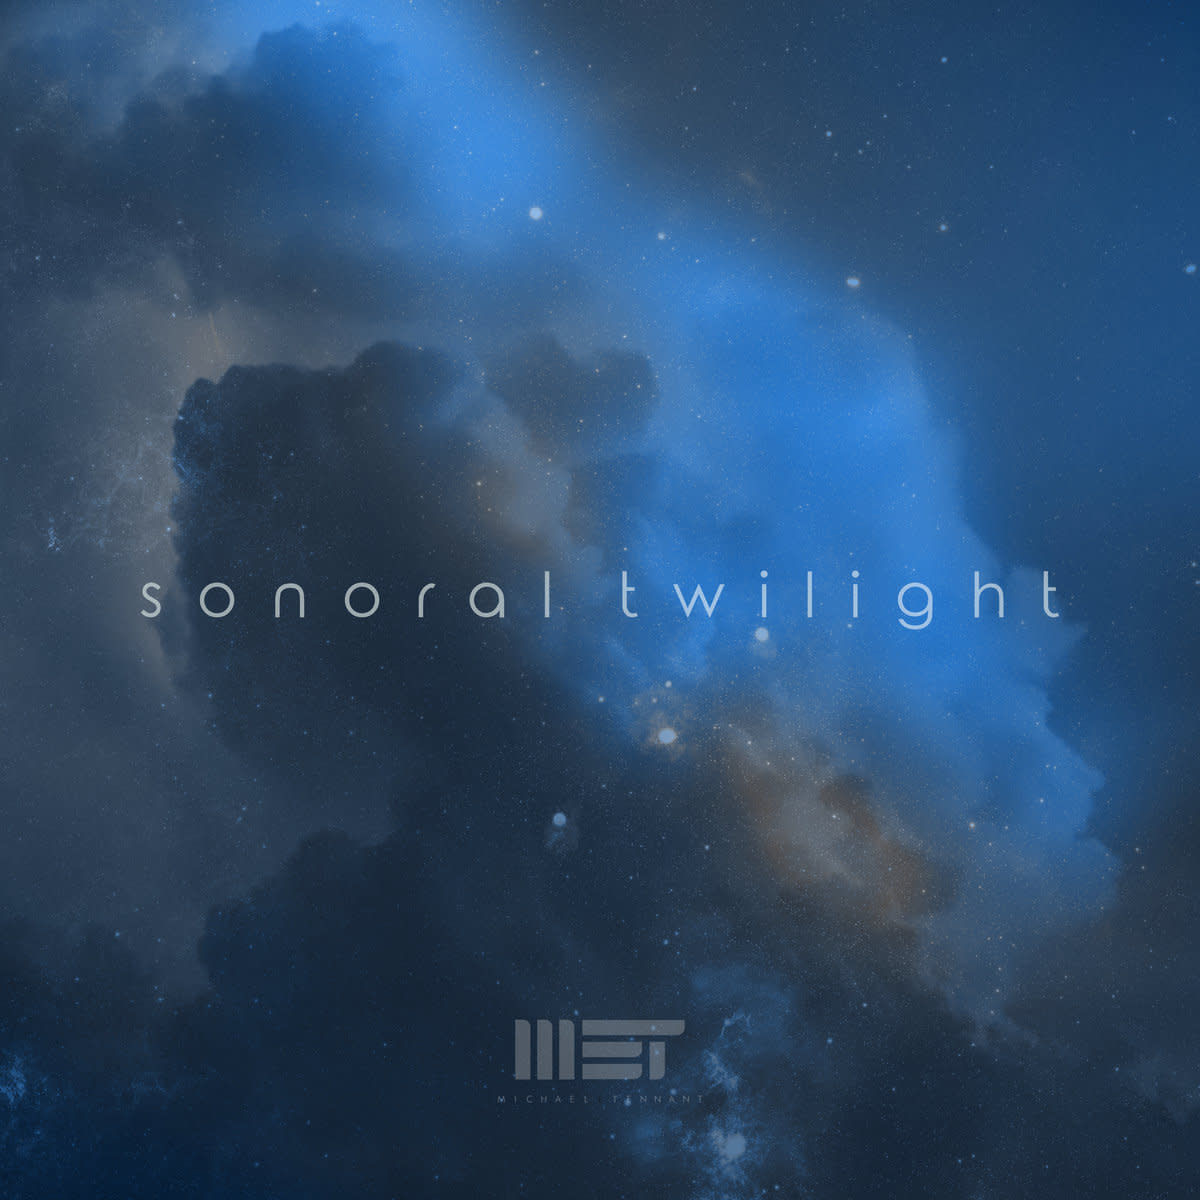 synth-single-review-sonoral-twilight-by-michael-e-tennant